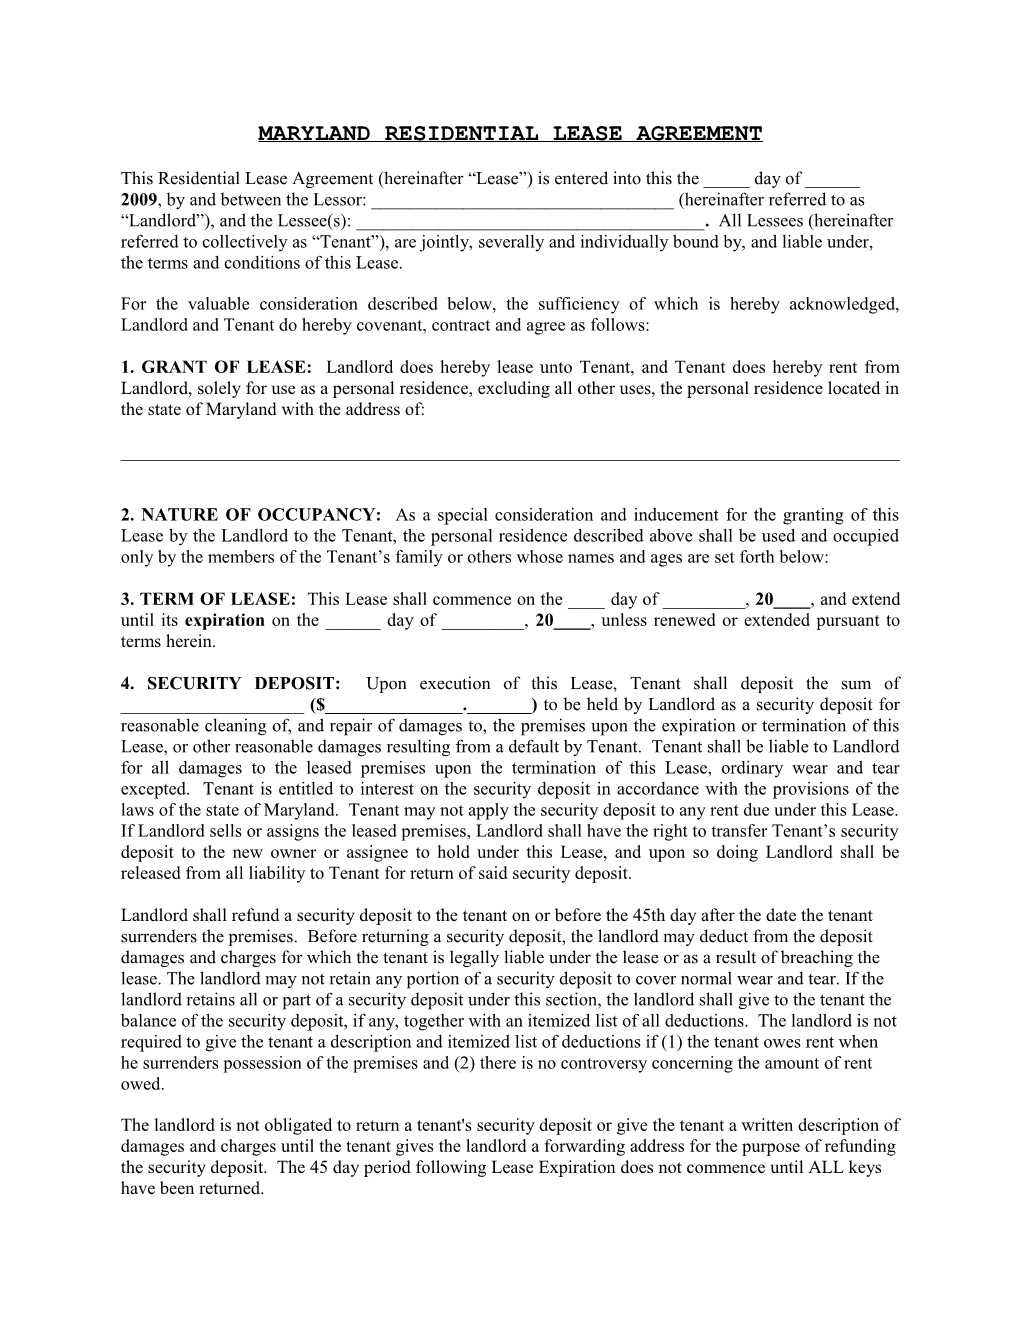 District of Columbia Residential Lease Agreement